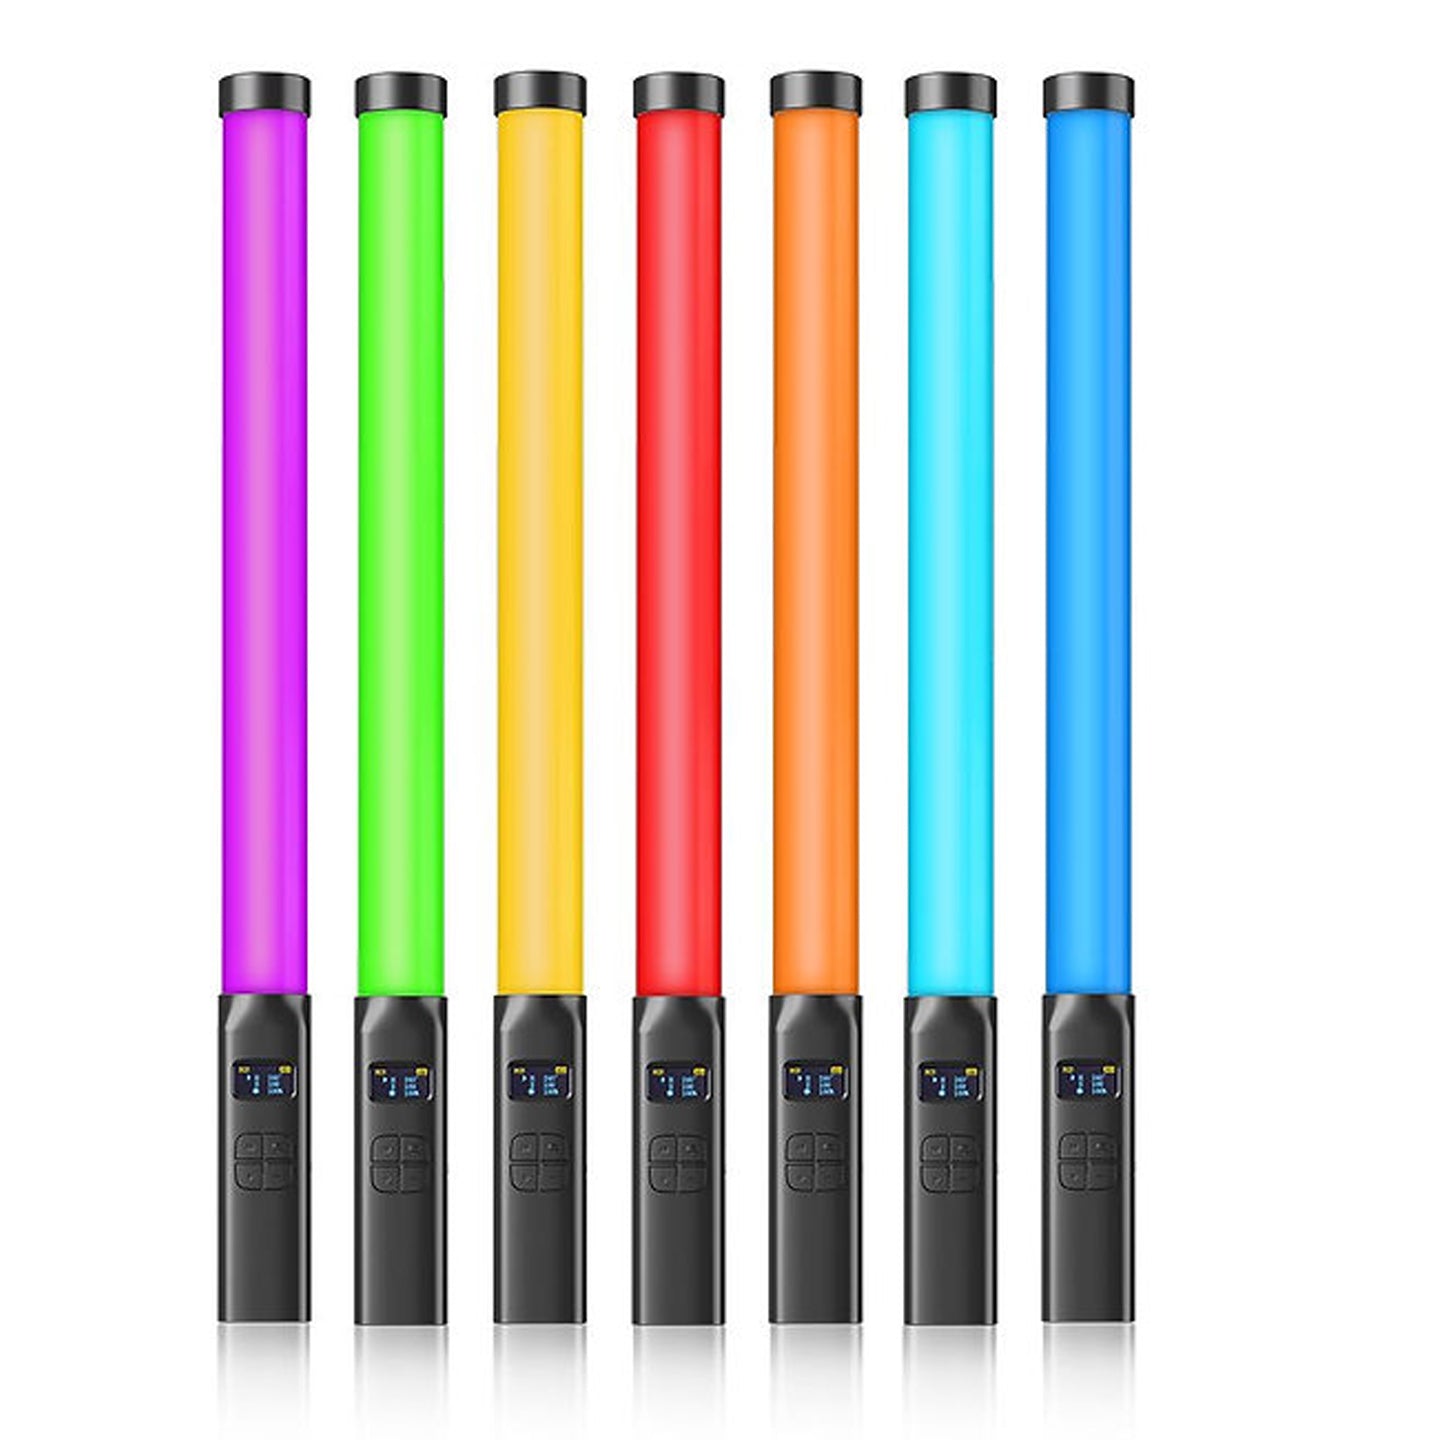 Ulanzi VL119 RGB Handheld LED Light Wand Video Stick with Rechargeable Built-in Battery 2600mAh, 20 Color Effects for Photo & Video